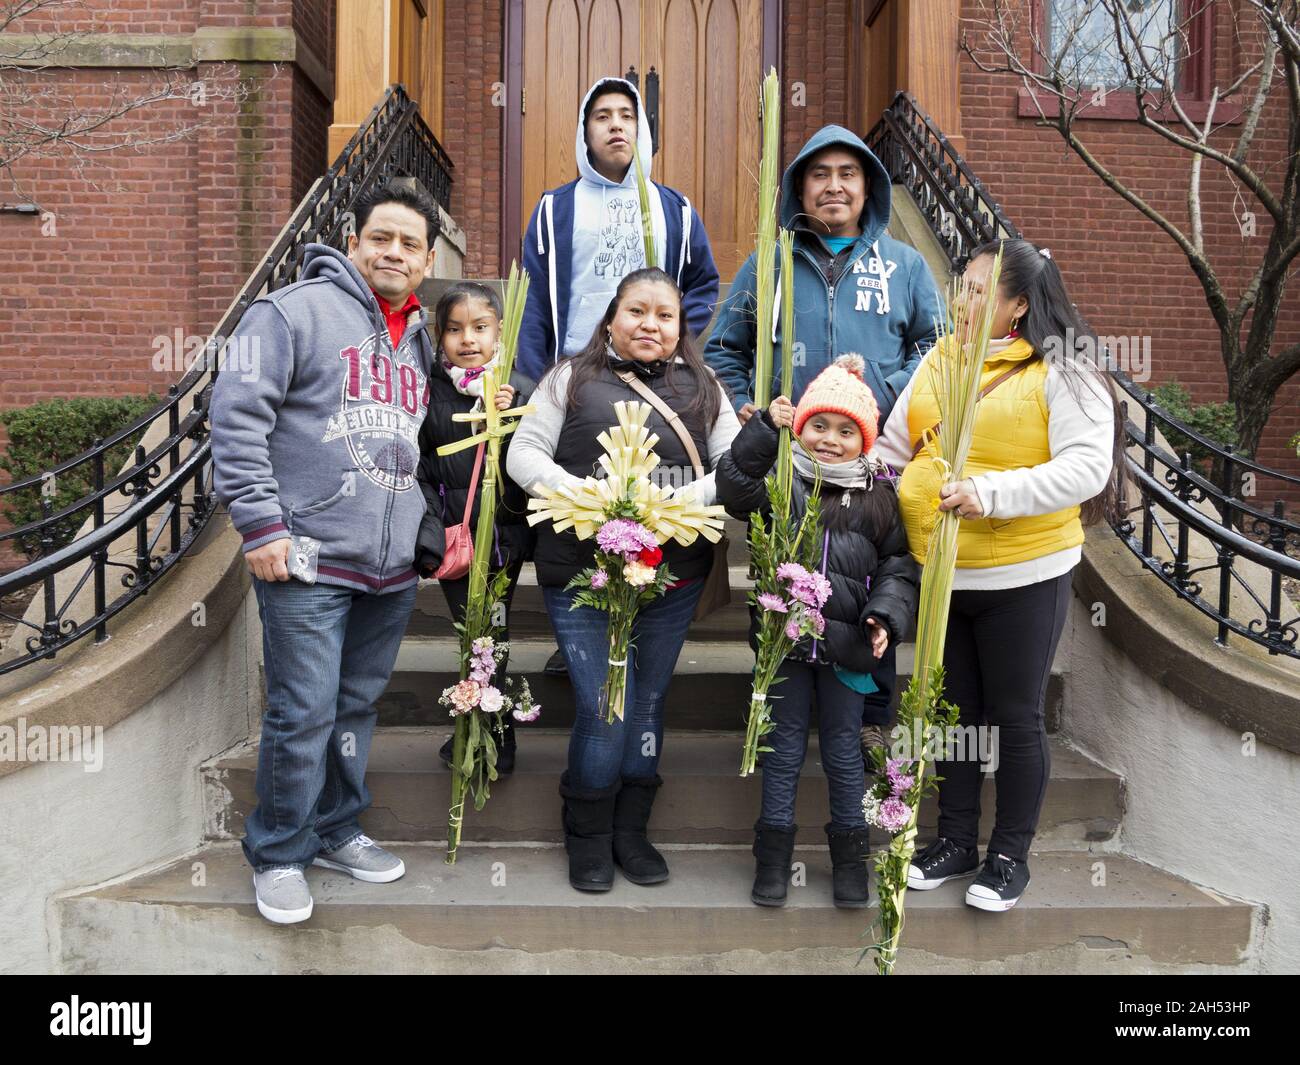 Extended Mexican family poses for portrait on church steps after Palm Sunday service in the Windsor Terrace section of Brooklyn, New York. Stock Photo